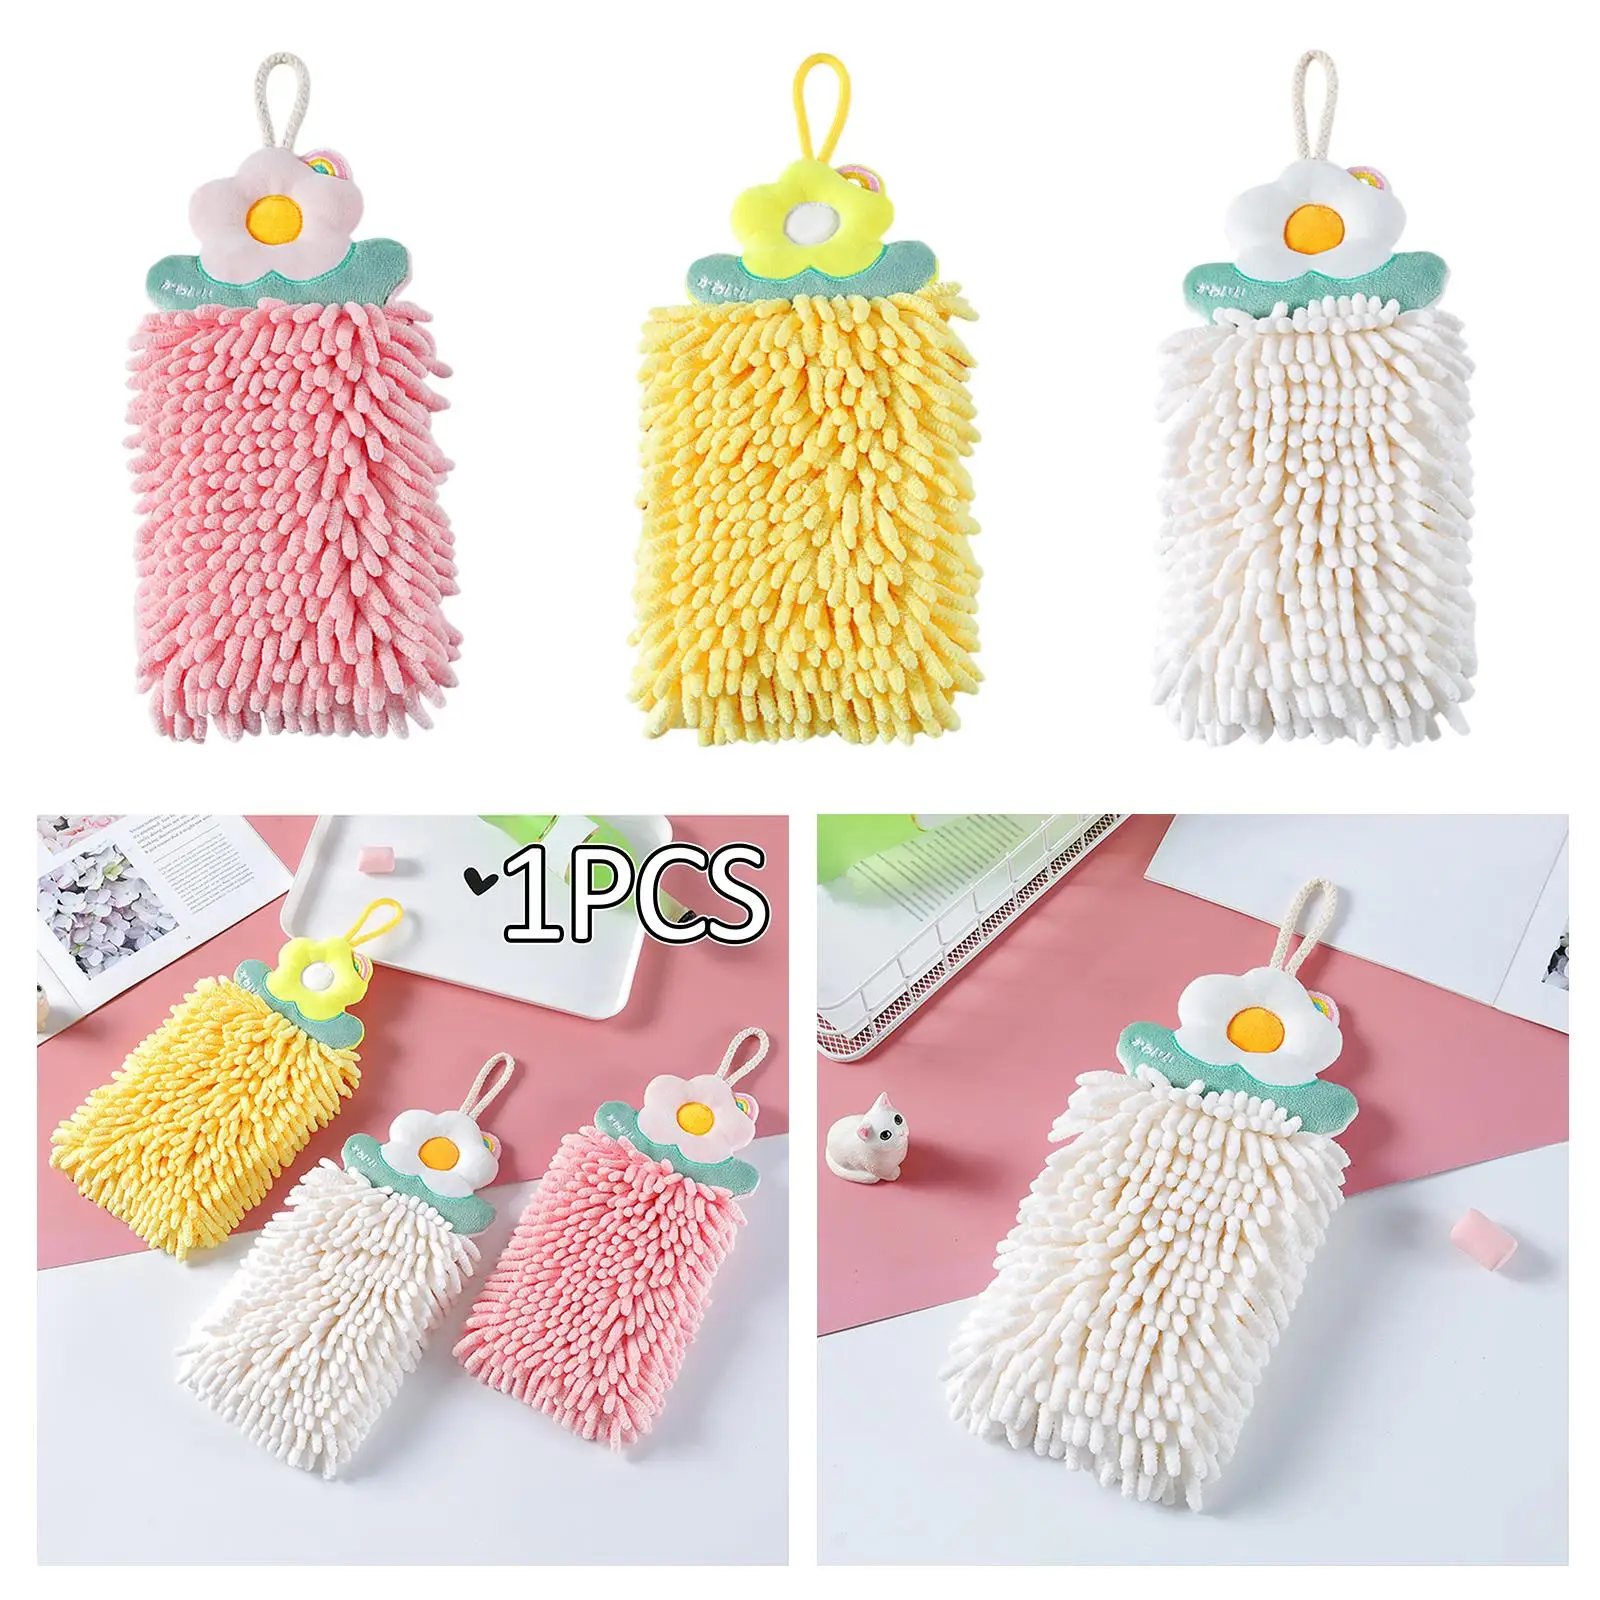 Hanging Hand Towels Reusable Decorative Kitchen Towels Small Hanging Towel for Bathroom and Kitchen Absorbent 11.81`` x6.30``